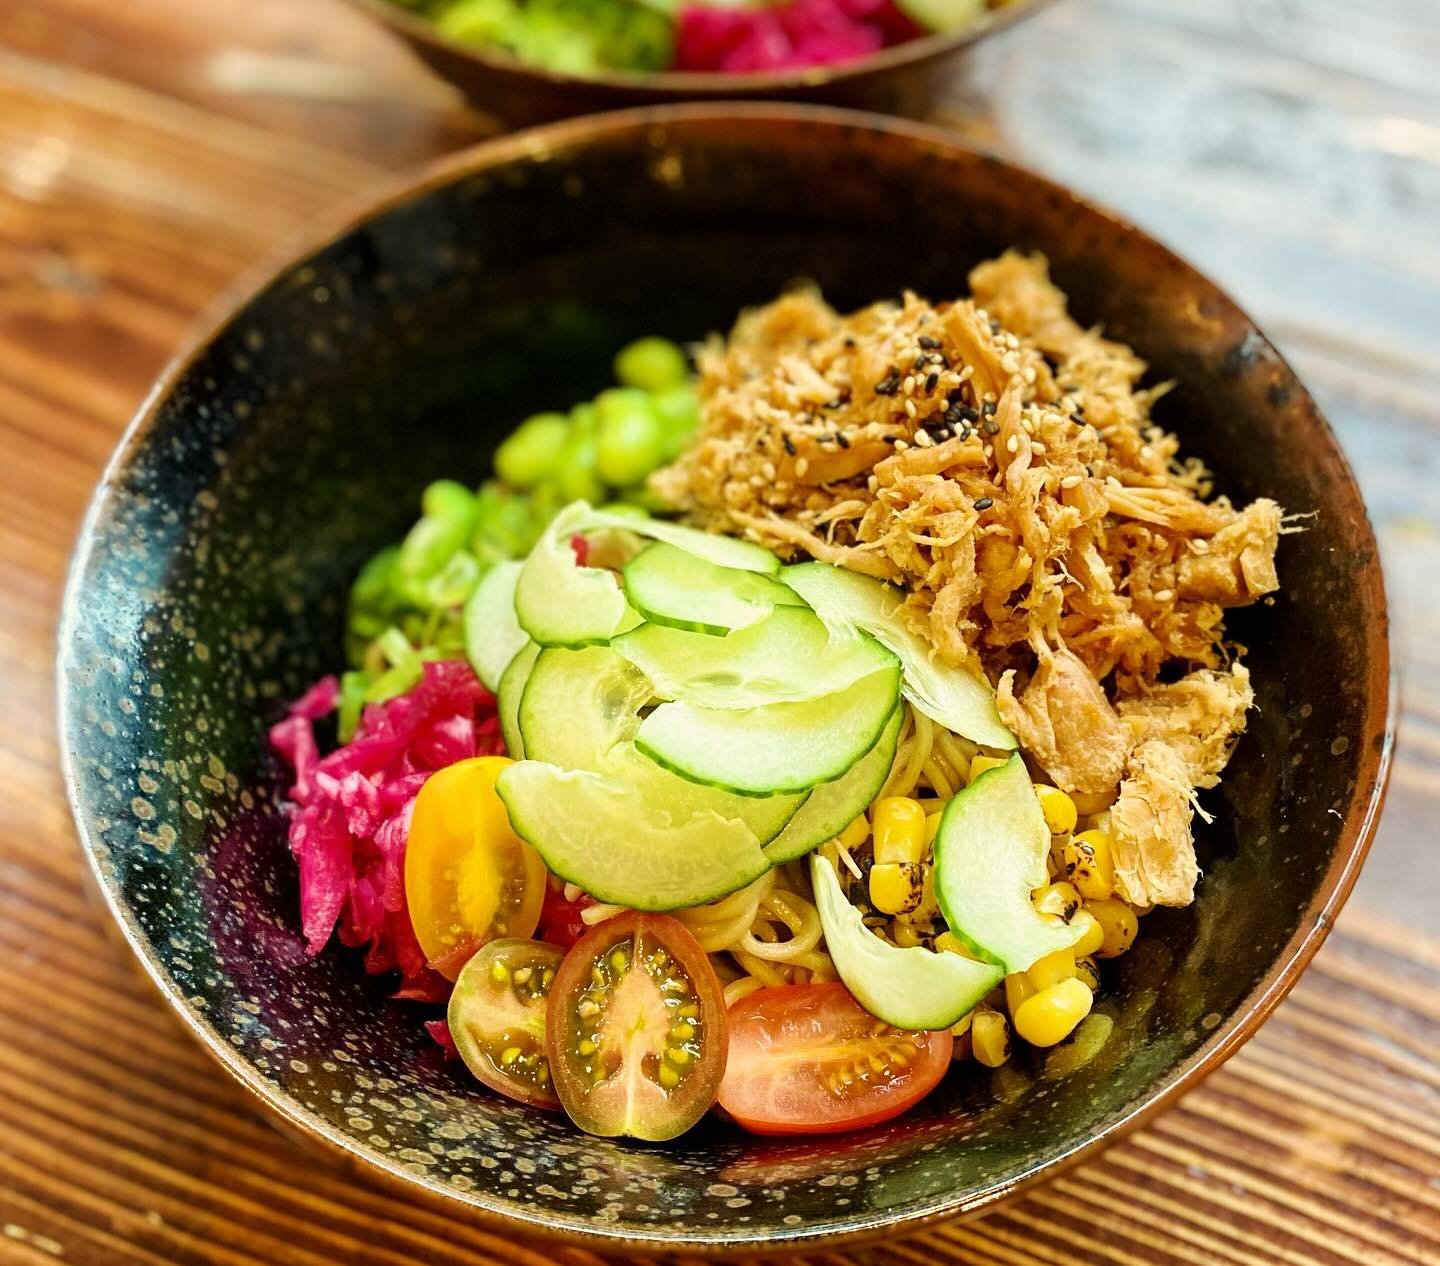 Our Summer Specials Menu launches today!

Our popular Hiyashi Chuka (cold ramen salad) makes a welcome return, as is our incredible Rice Lager, made in collaboration with @orbitbeers 

We&rsquo;ve got a beautifully refreshing HANA Yuzu Sake Spritz fo